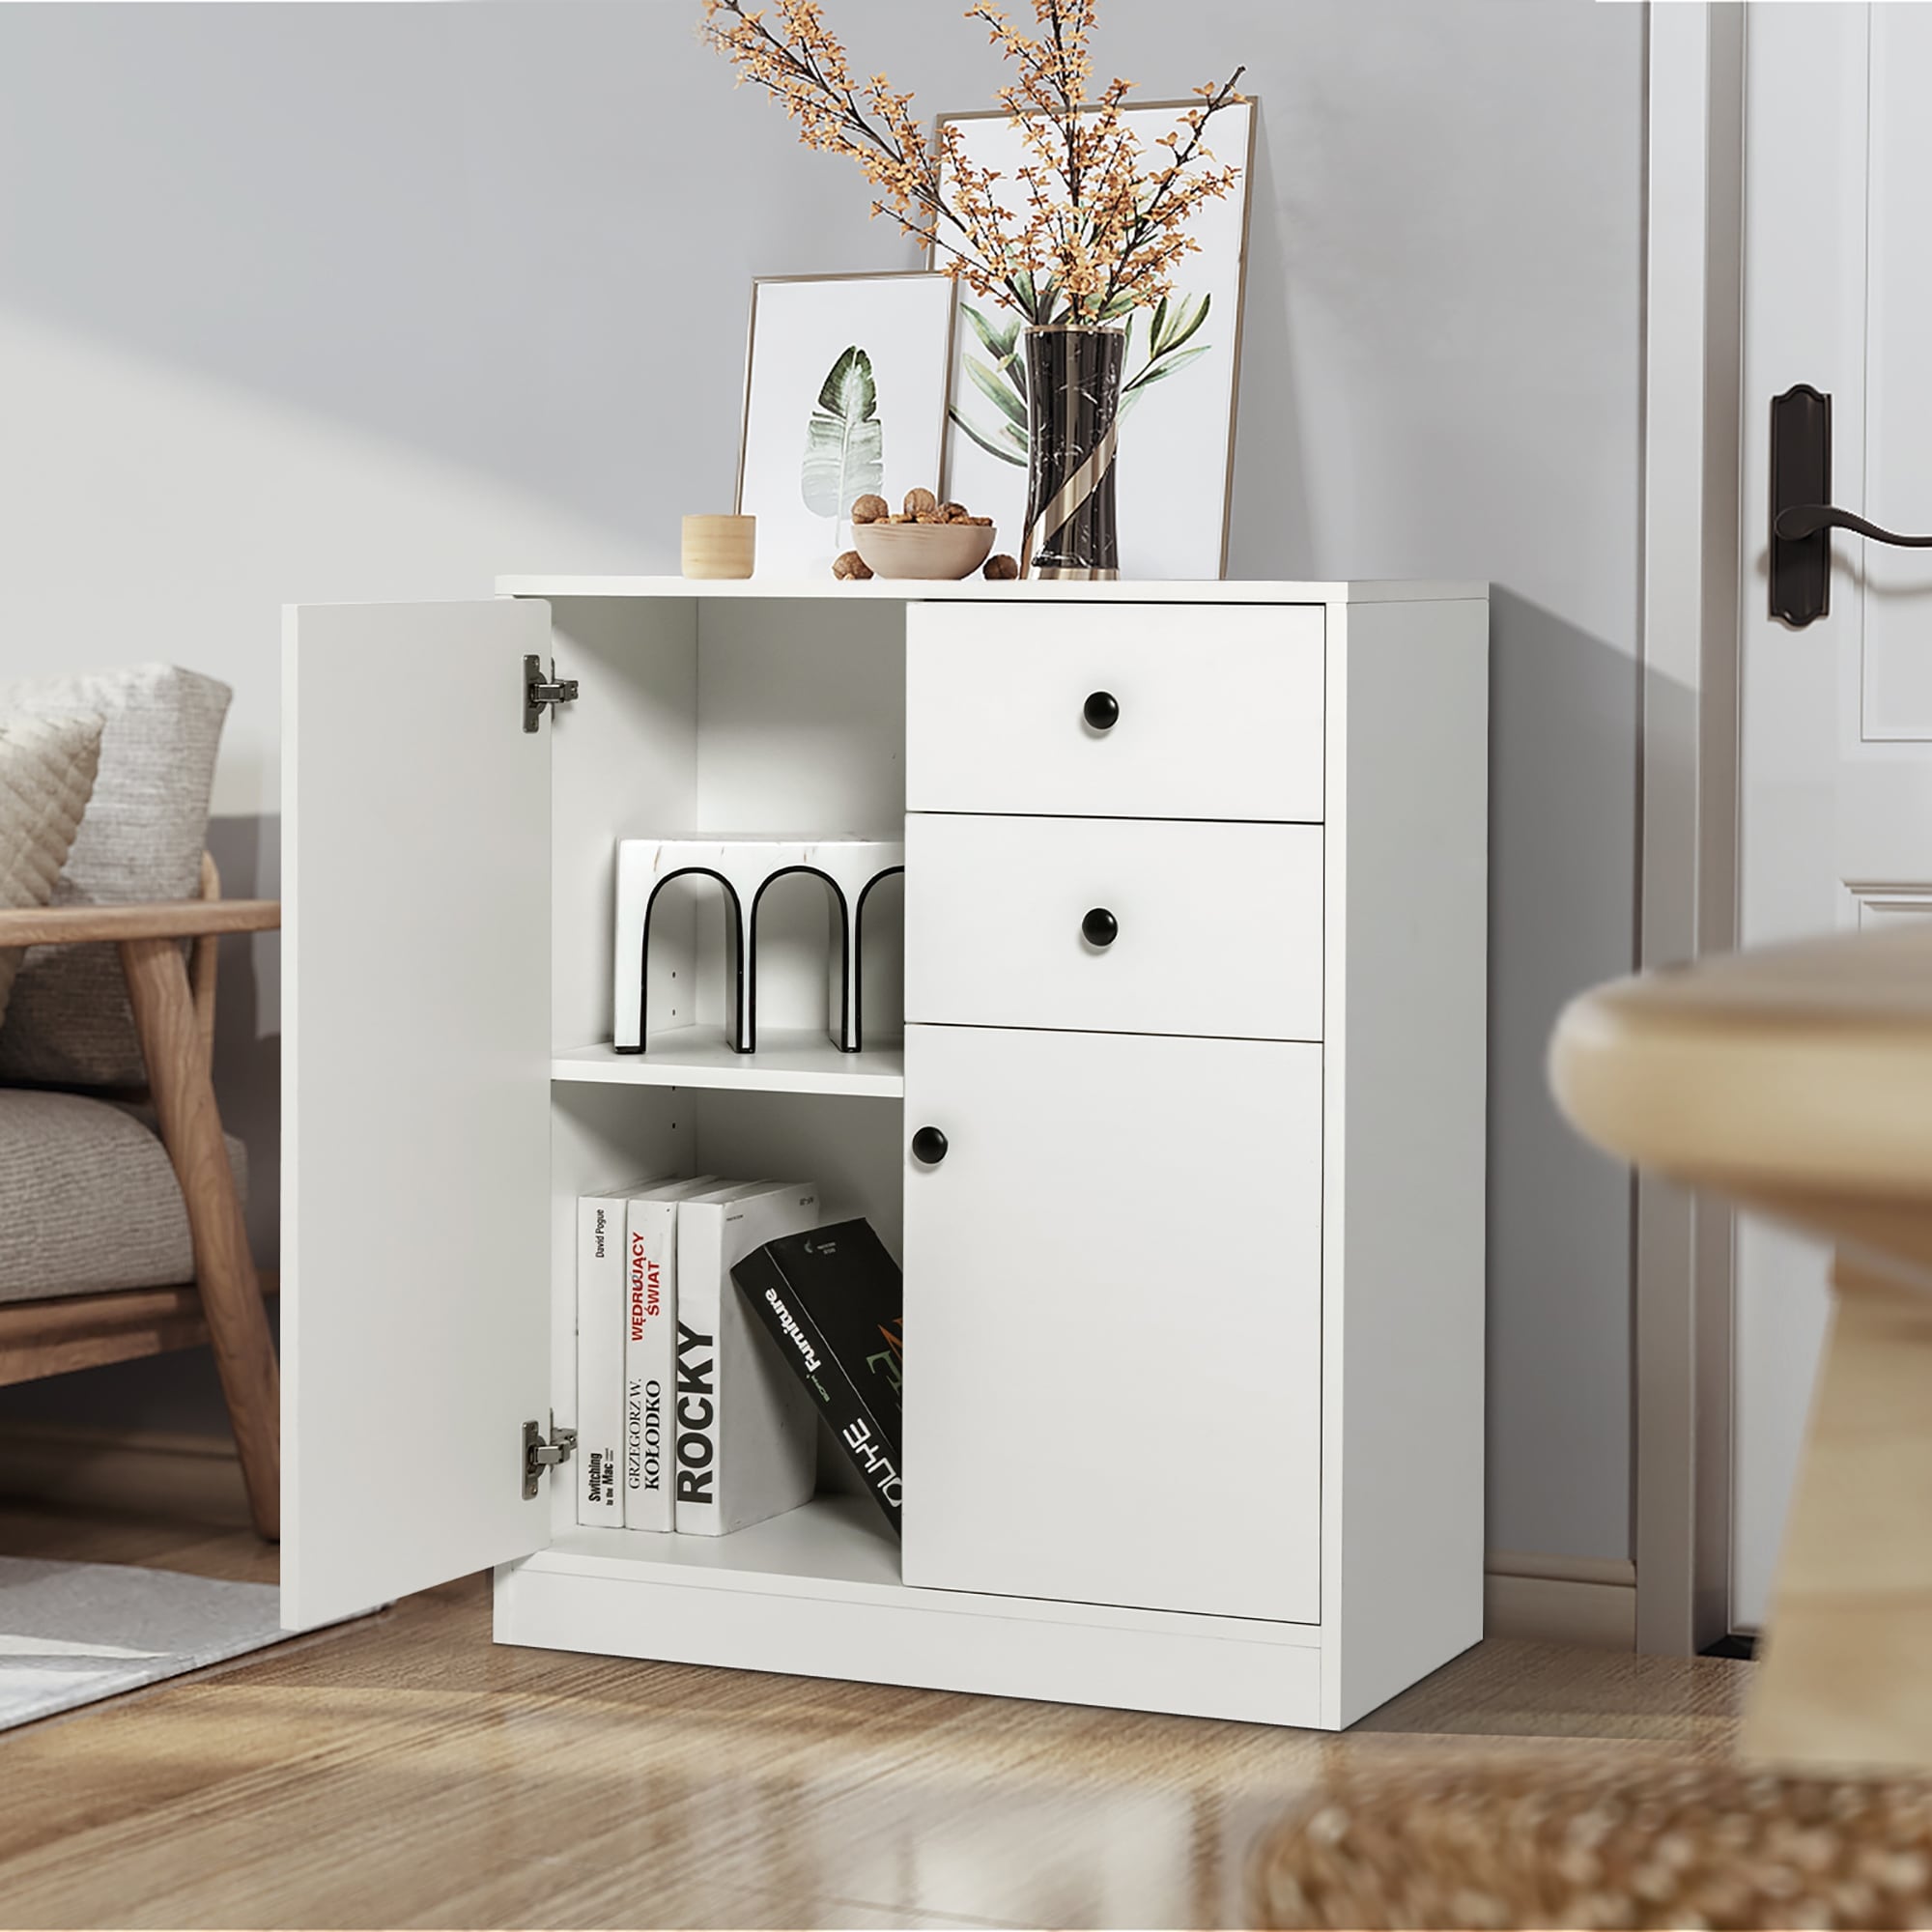 https://ak1.ostkcdn.com/images/products/is/images/direct/06f1203f9c933452a0155517227facce668643a1/Kitchen-Storage-Cabinet-2-Drawer-Floor-Cupboard-w--Adjustable-Shelves.jpg